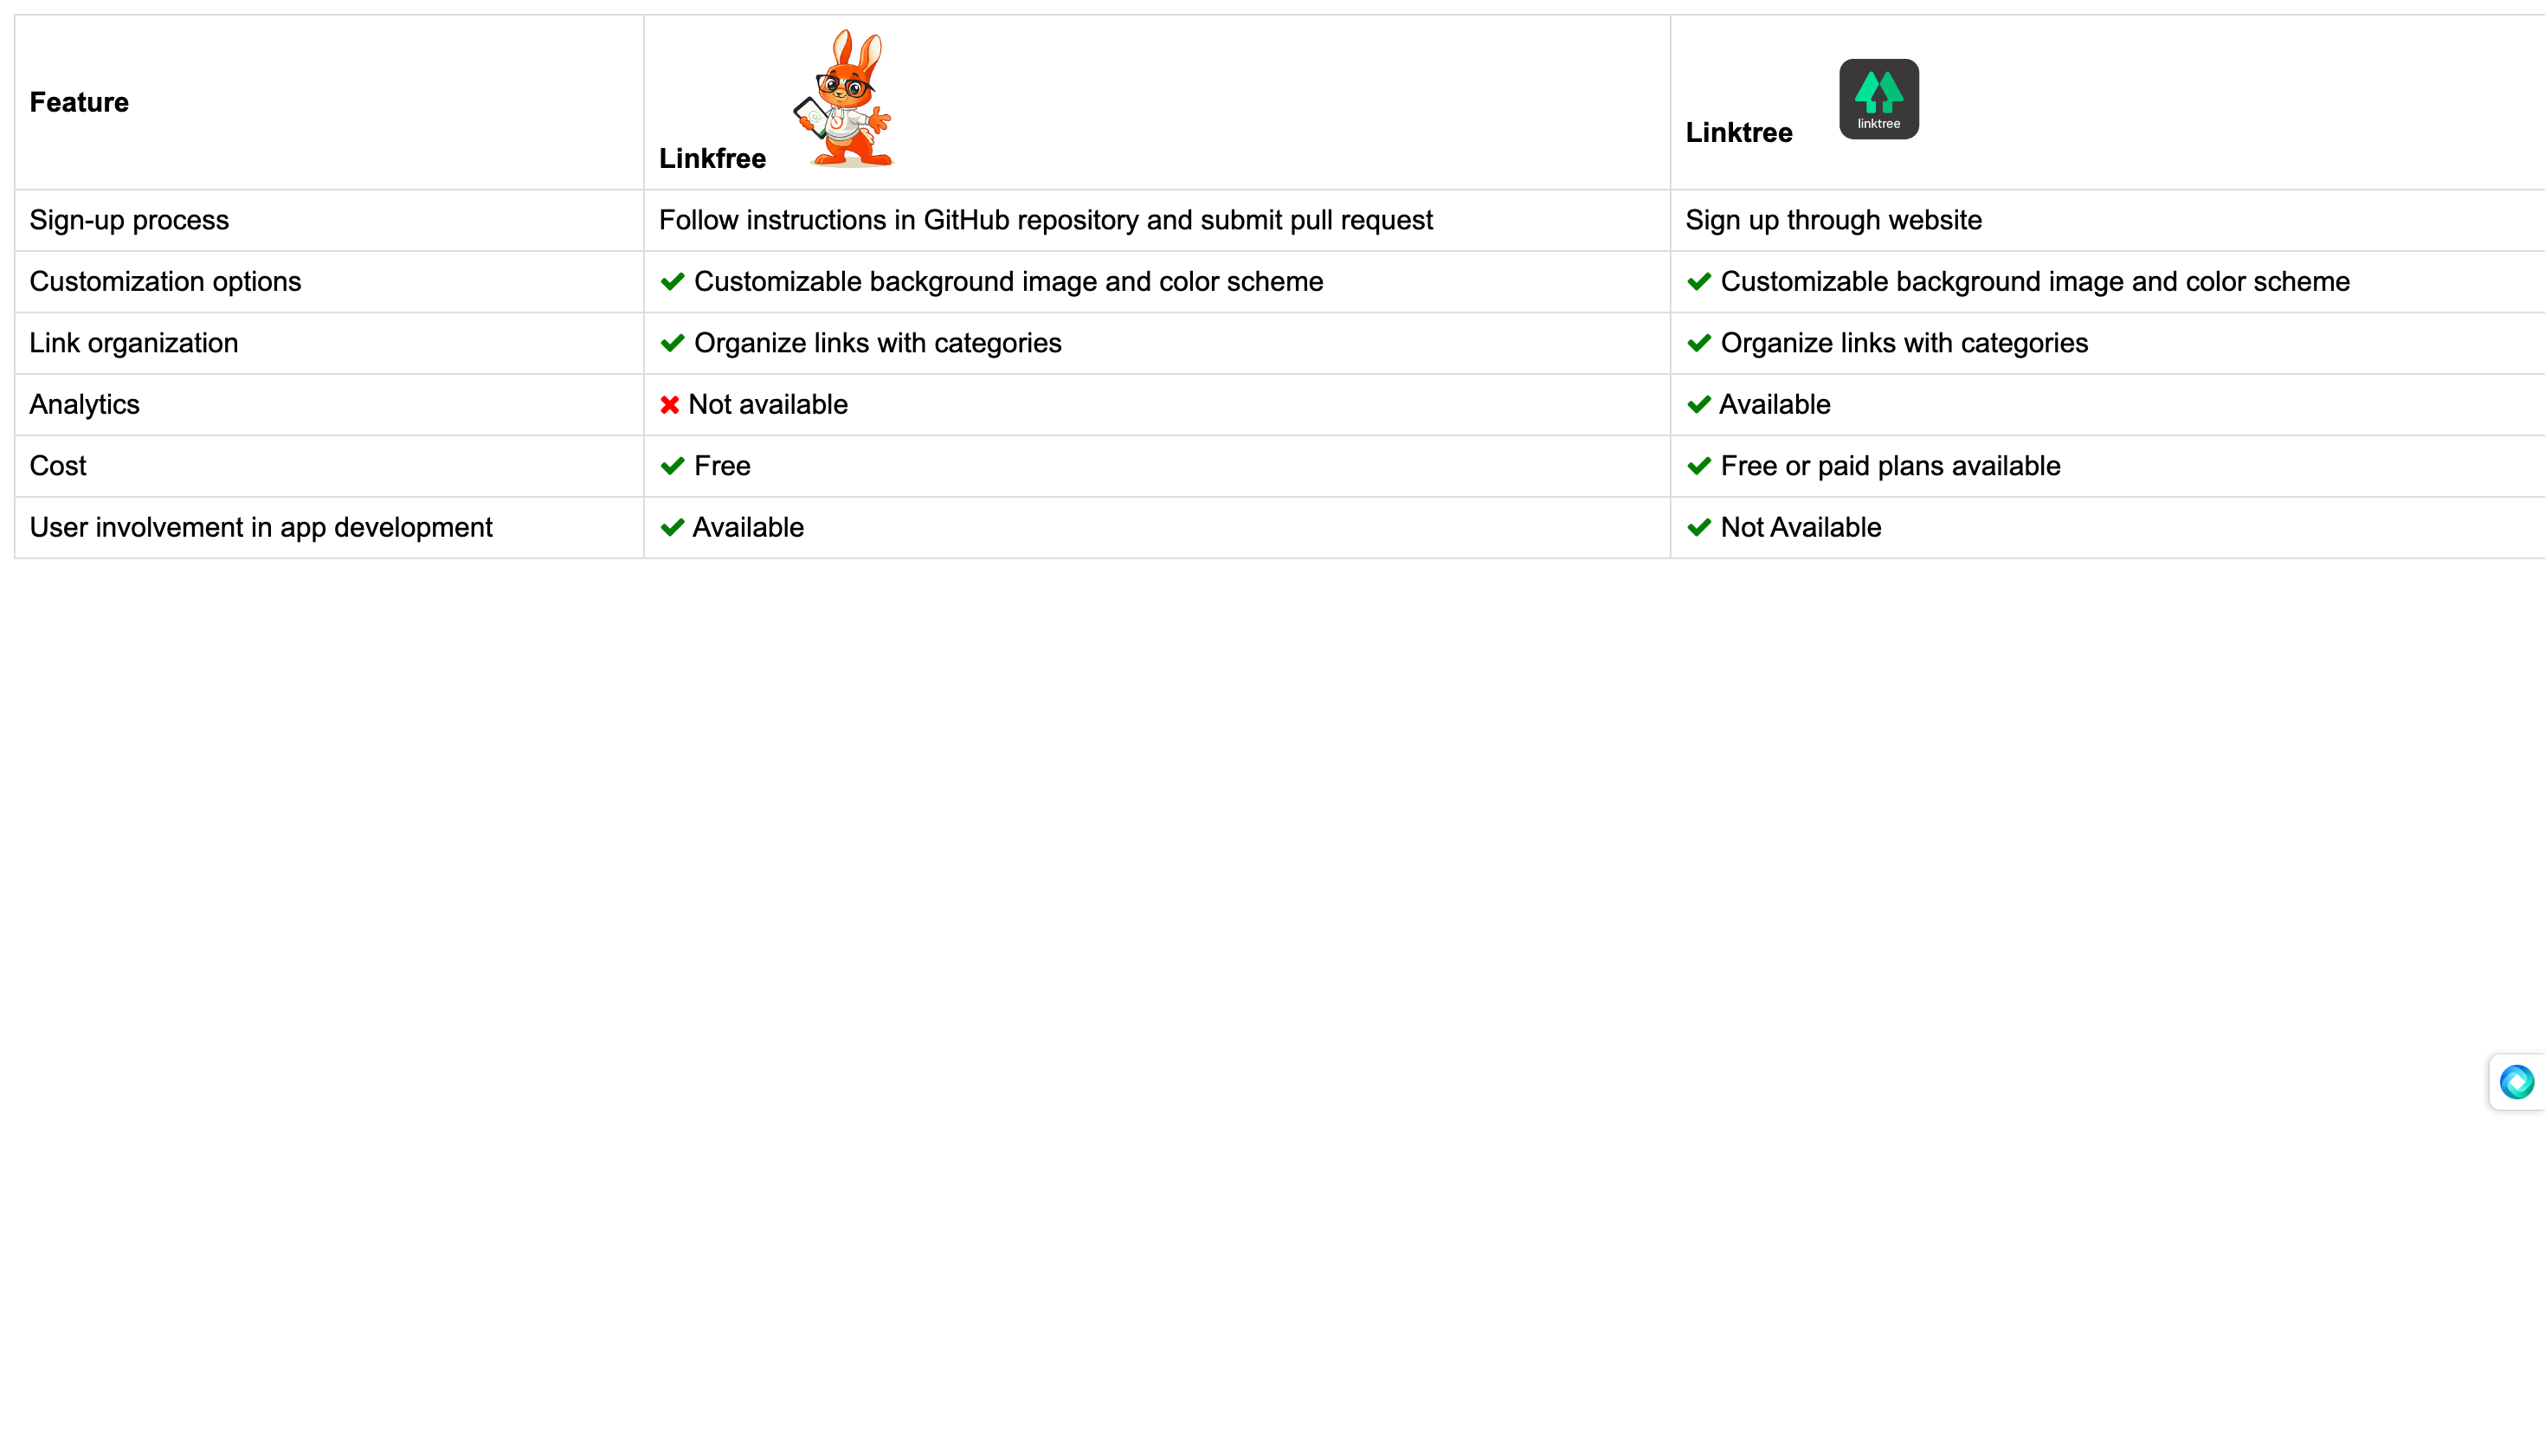 A Comparison chart between Linkfree and Linktree